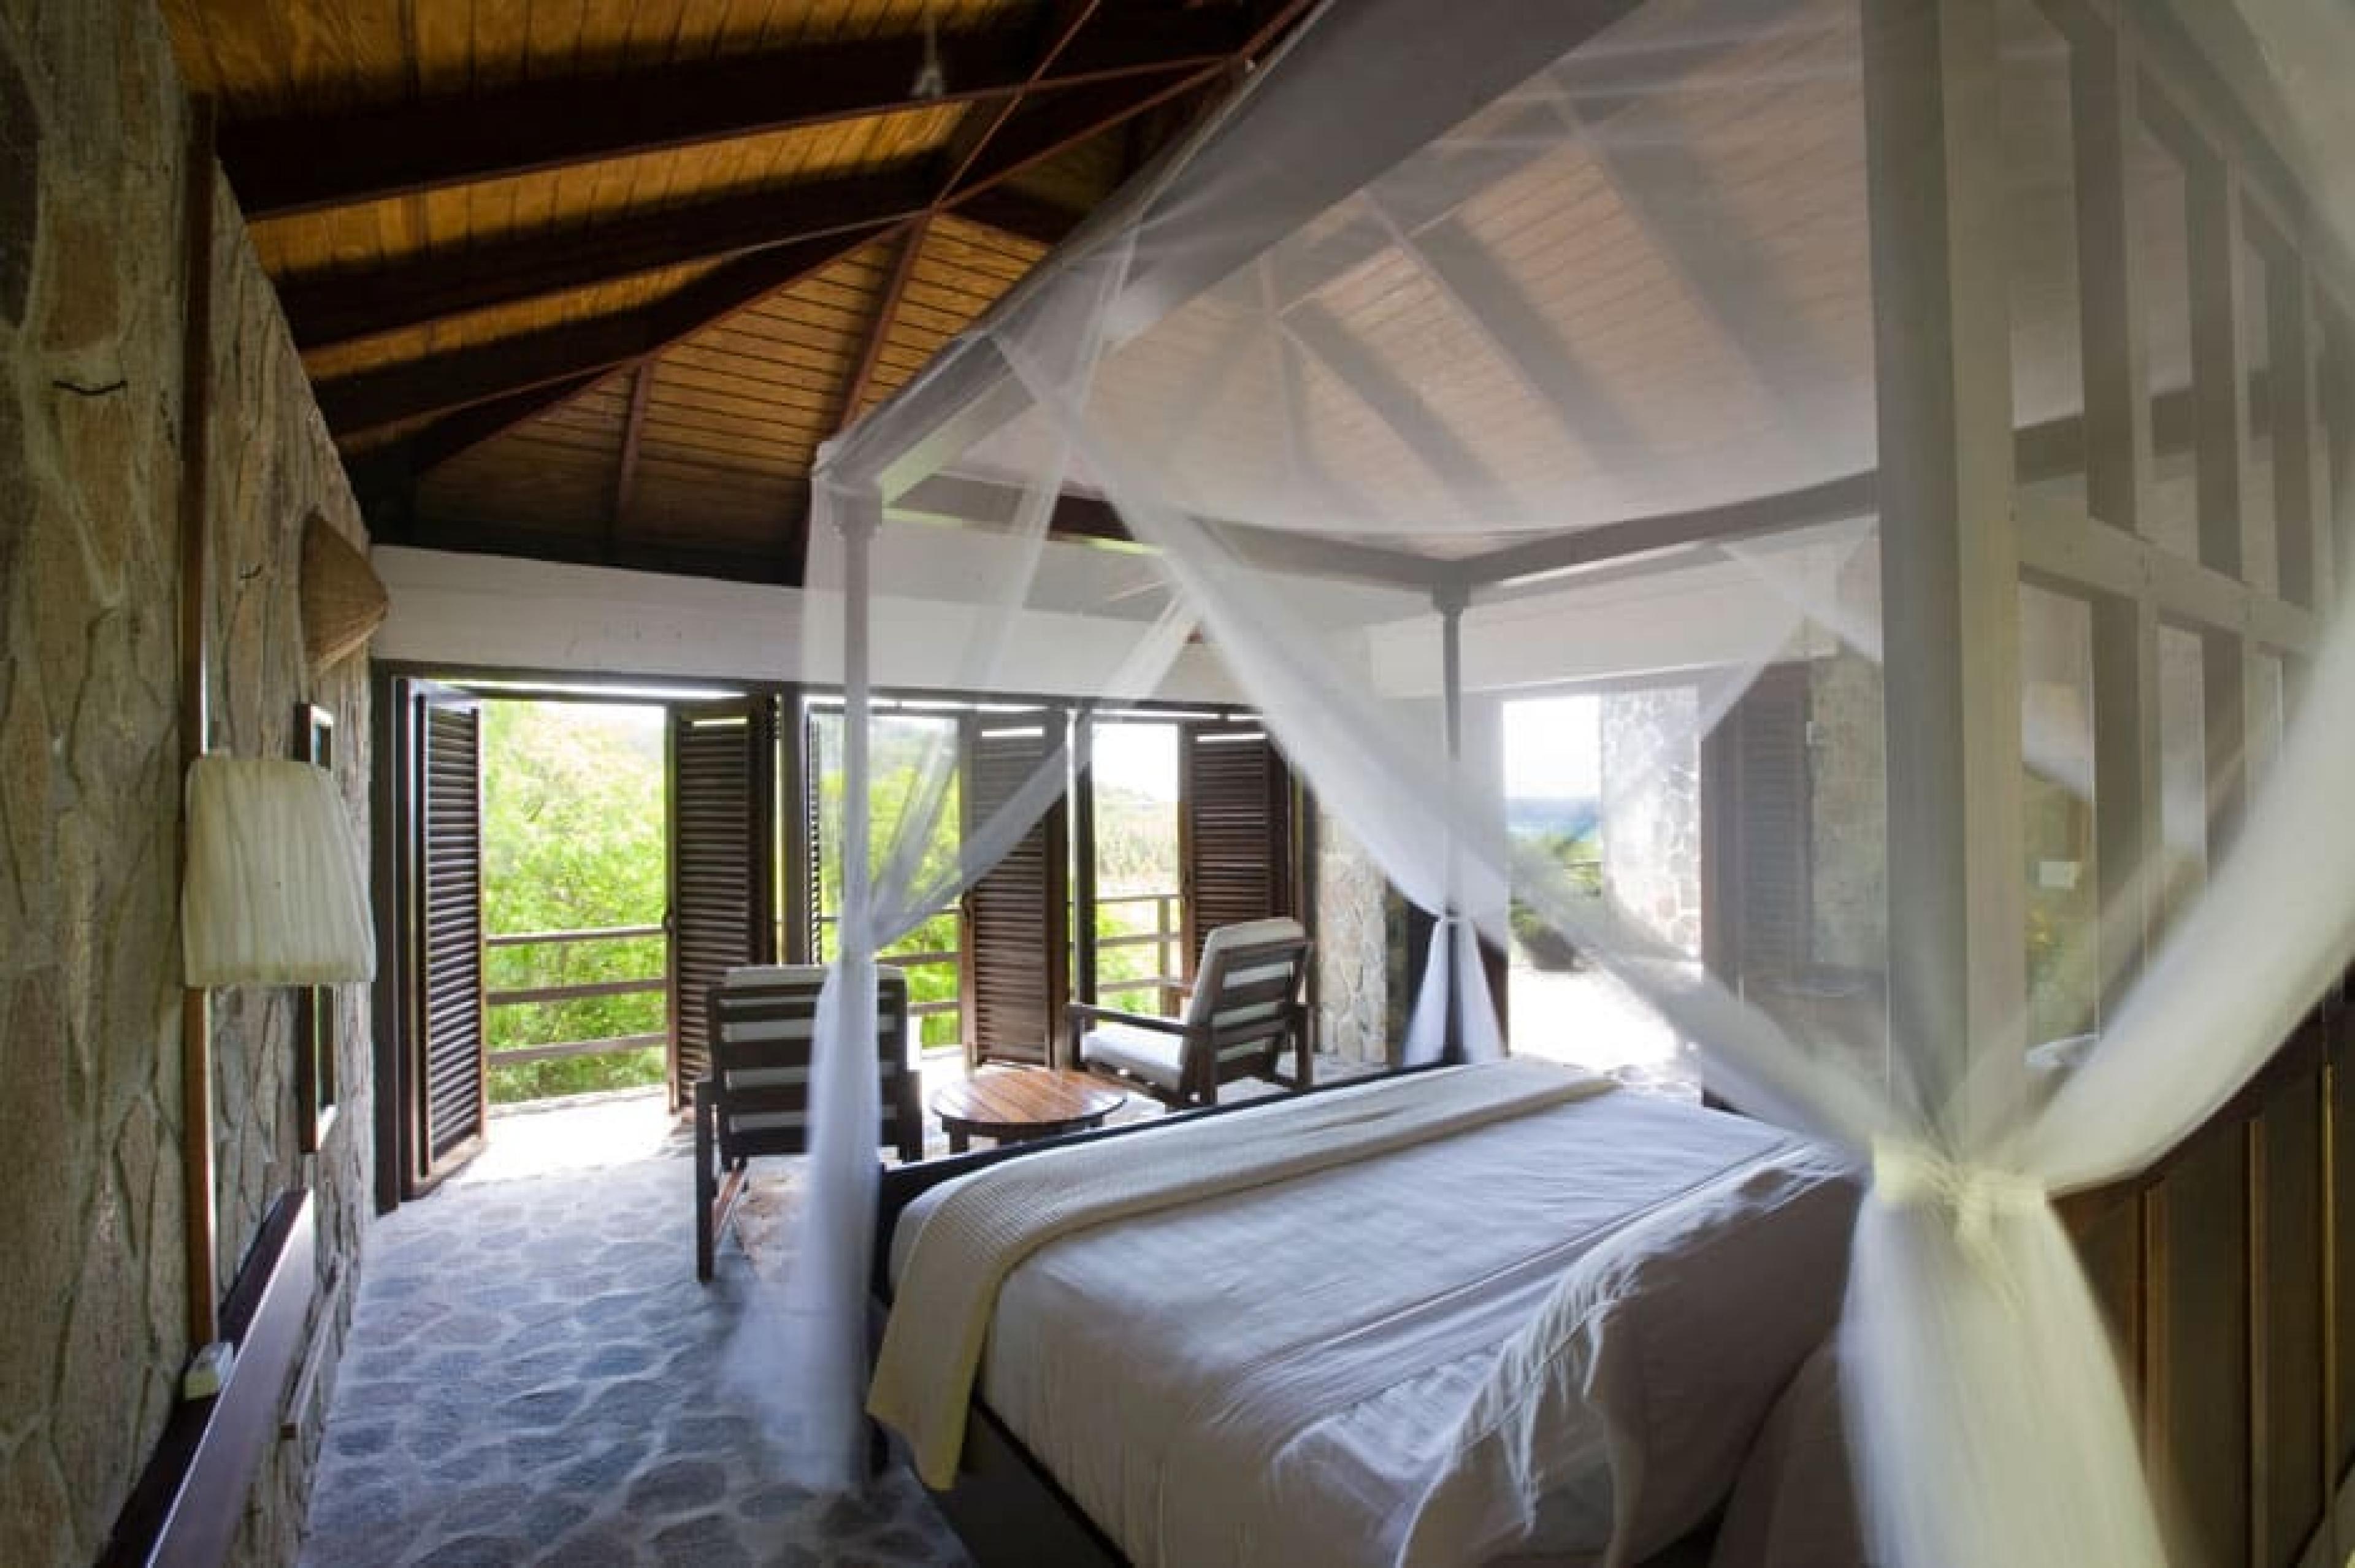 Bedroom at Firefly Hotel, Mustique, Caribbean